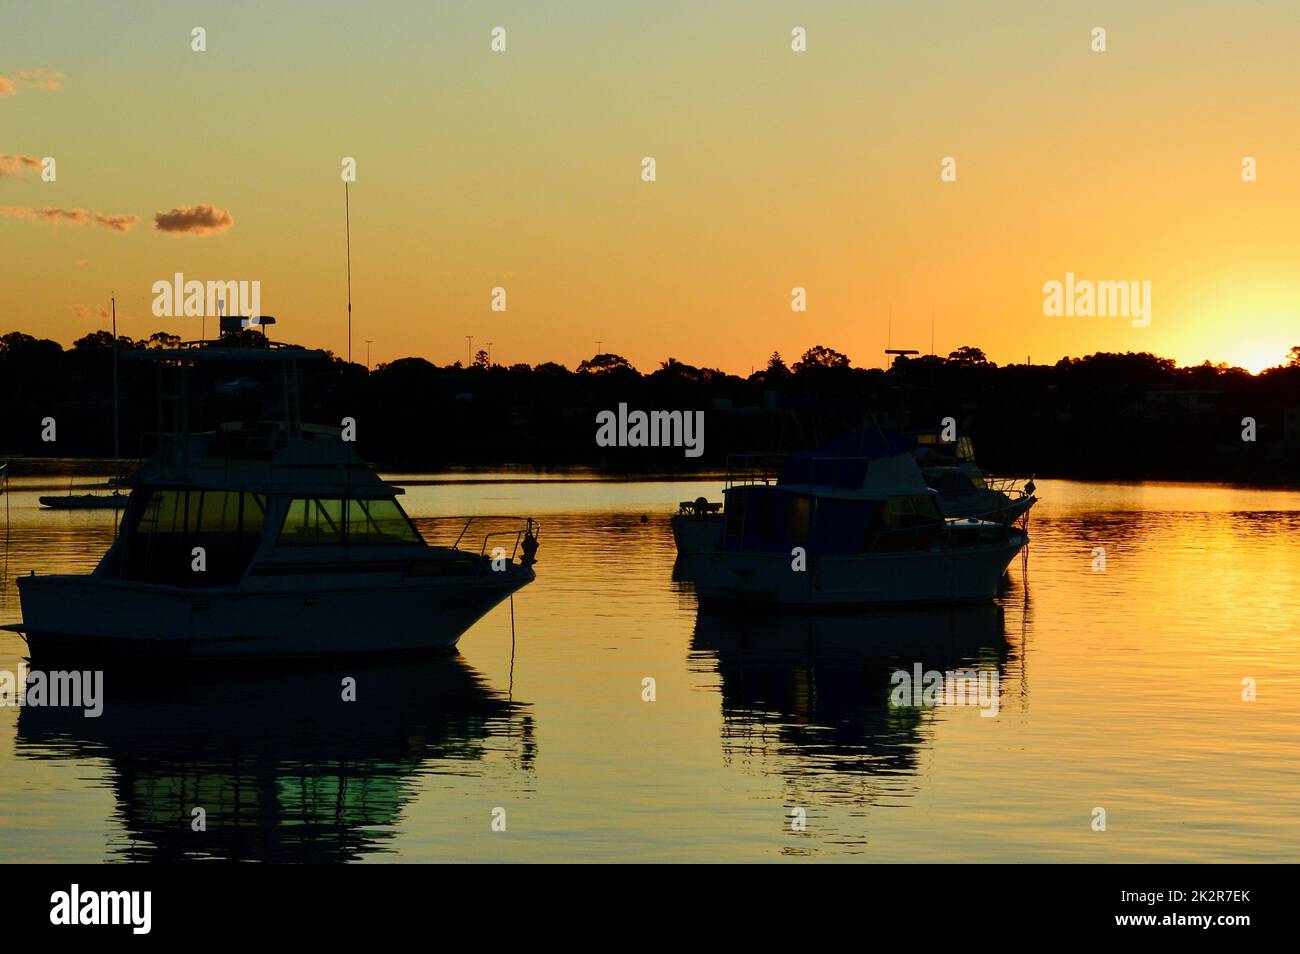 Boats on the harbor at sunset Stock Photo